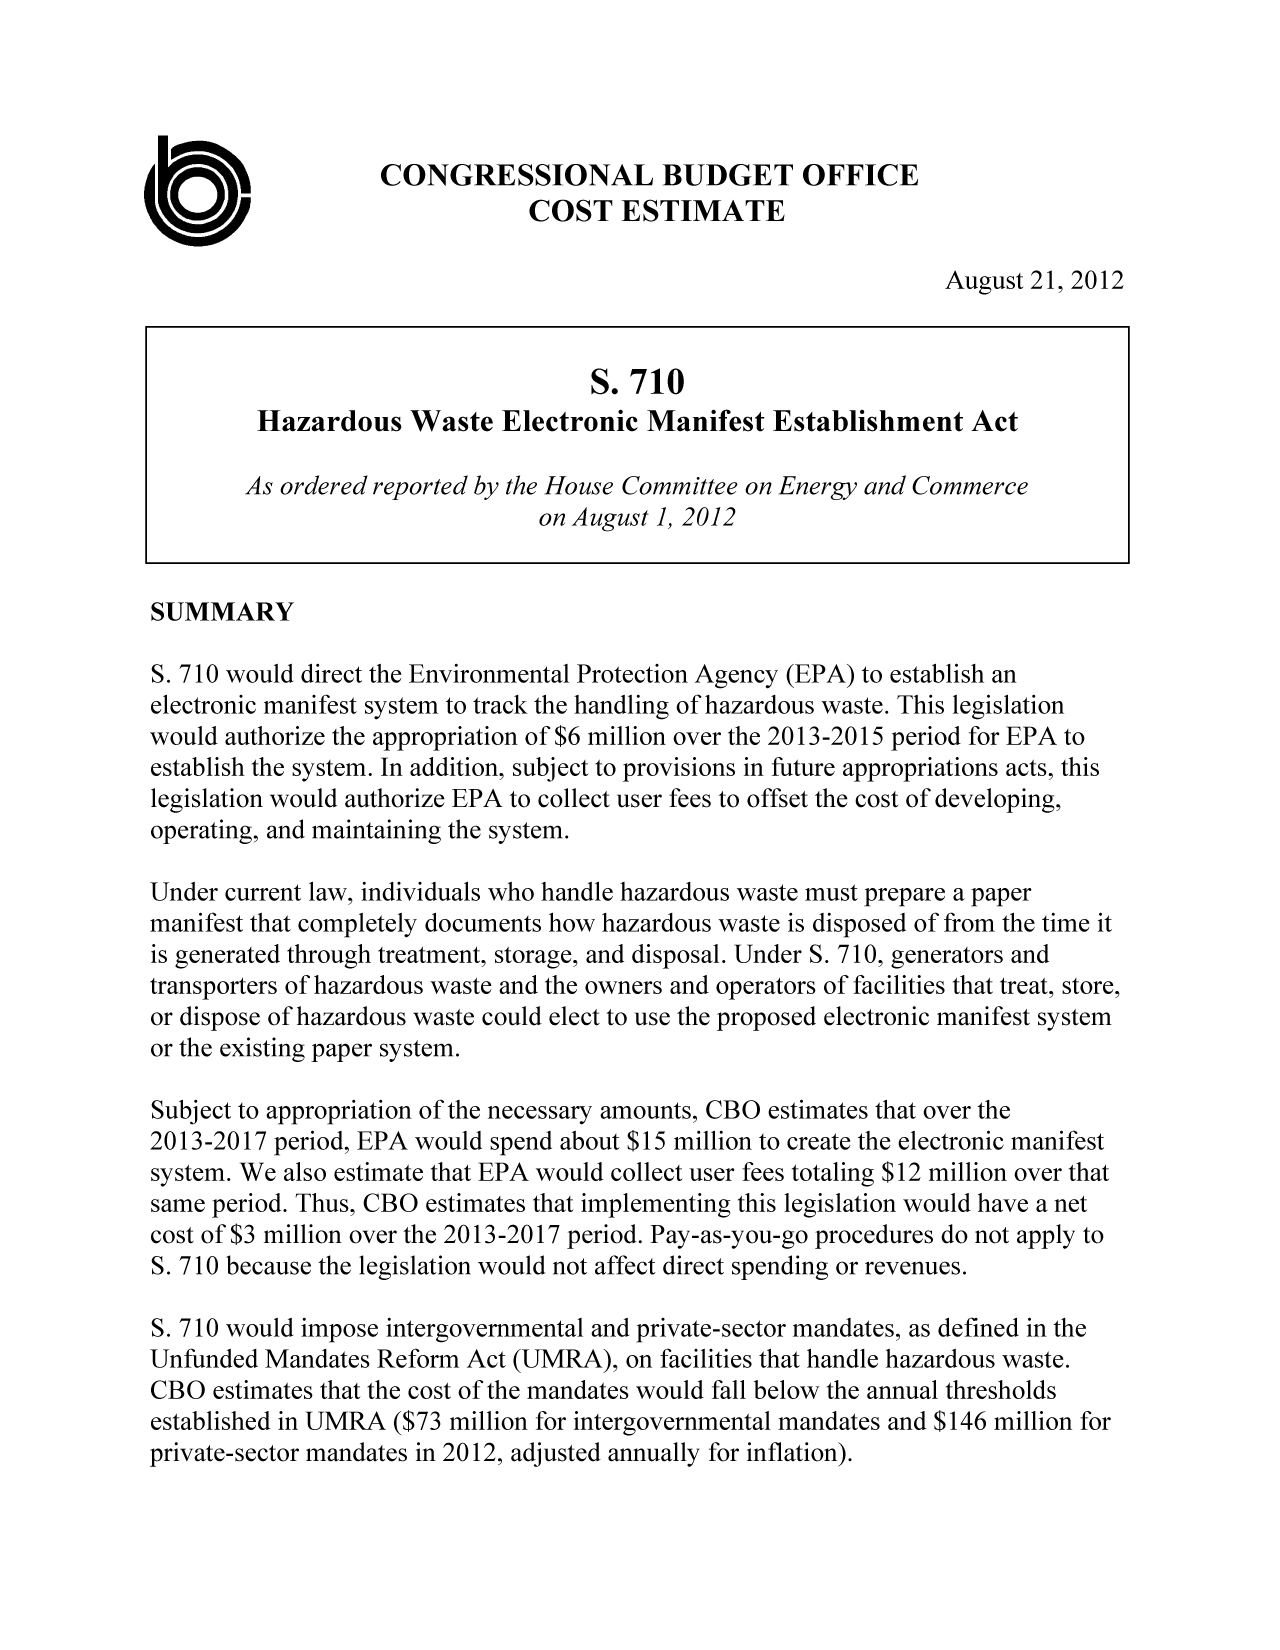 handle is hein.congrec/cbo10875 and id is 1 raw text is: CONGRESSIONAL BUDGET OFFICE
COST ESTIMATE
August 21, 2012
S. 710
Hazardous Waste Electronic Manifest Establishment Act
As ordered reported by the House Committee on Energy and Commerce
on August1, 2012
SUMMARY
S. 710 would direct the Environmental Protection Agency (EPA) to establish an
electronic manifest system to track the handling of hazardous waste. This legislation
would authorize the appropriation of $6 million over the 2013-2015 period for EPA to
establish the system. In addition, subject to provisions in future appropriations acts, this
legislation would authorize EPA to collect user fees to offset the cost of developing,
operating, and maintaining the system.
Under current law, individuals who handle hazardous waste must prepare a paper
manifest that completely documents how hazardous waste is disposed of from the time it
is generated through treatment, storage, and disposal. Under S. 710, generators and
transporters of hazardous waste and the owners and operators of facilities that treat, store,
or dispose of hazardous waste could elect to use the proposed electronic manifest system
or the existing paper system.
Subject to appropriation of the necessary amounts, CBO estimates that over the
2013-2017 period, EPA would spend about $15 million to create the electronic manifest
system. We also estimate that EPA would collect user fees totaling $12 million over that
same period. Thus, CBO estimates that implementing this legislation would have a net
cost of $3 million over the 2013-2017 period. Pay-as-you-go procedures do not apply to
S. 710 because the legislation would not affect direct spending or revenues.
5. 710 would impose intergovernmental and private-sector mandates, as defined in the
Unfunded Mandates Reform Act (UMRA), on facilities that handle hazardous waste.
CBO estimates that the cost of the mandates would fall below the annual thresholds
established in UMRA ($73 million for intergovernmental mandates and $146 million for
private-sector mandates in 2012, adjusted annually for inflation).


